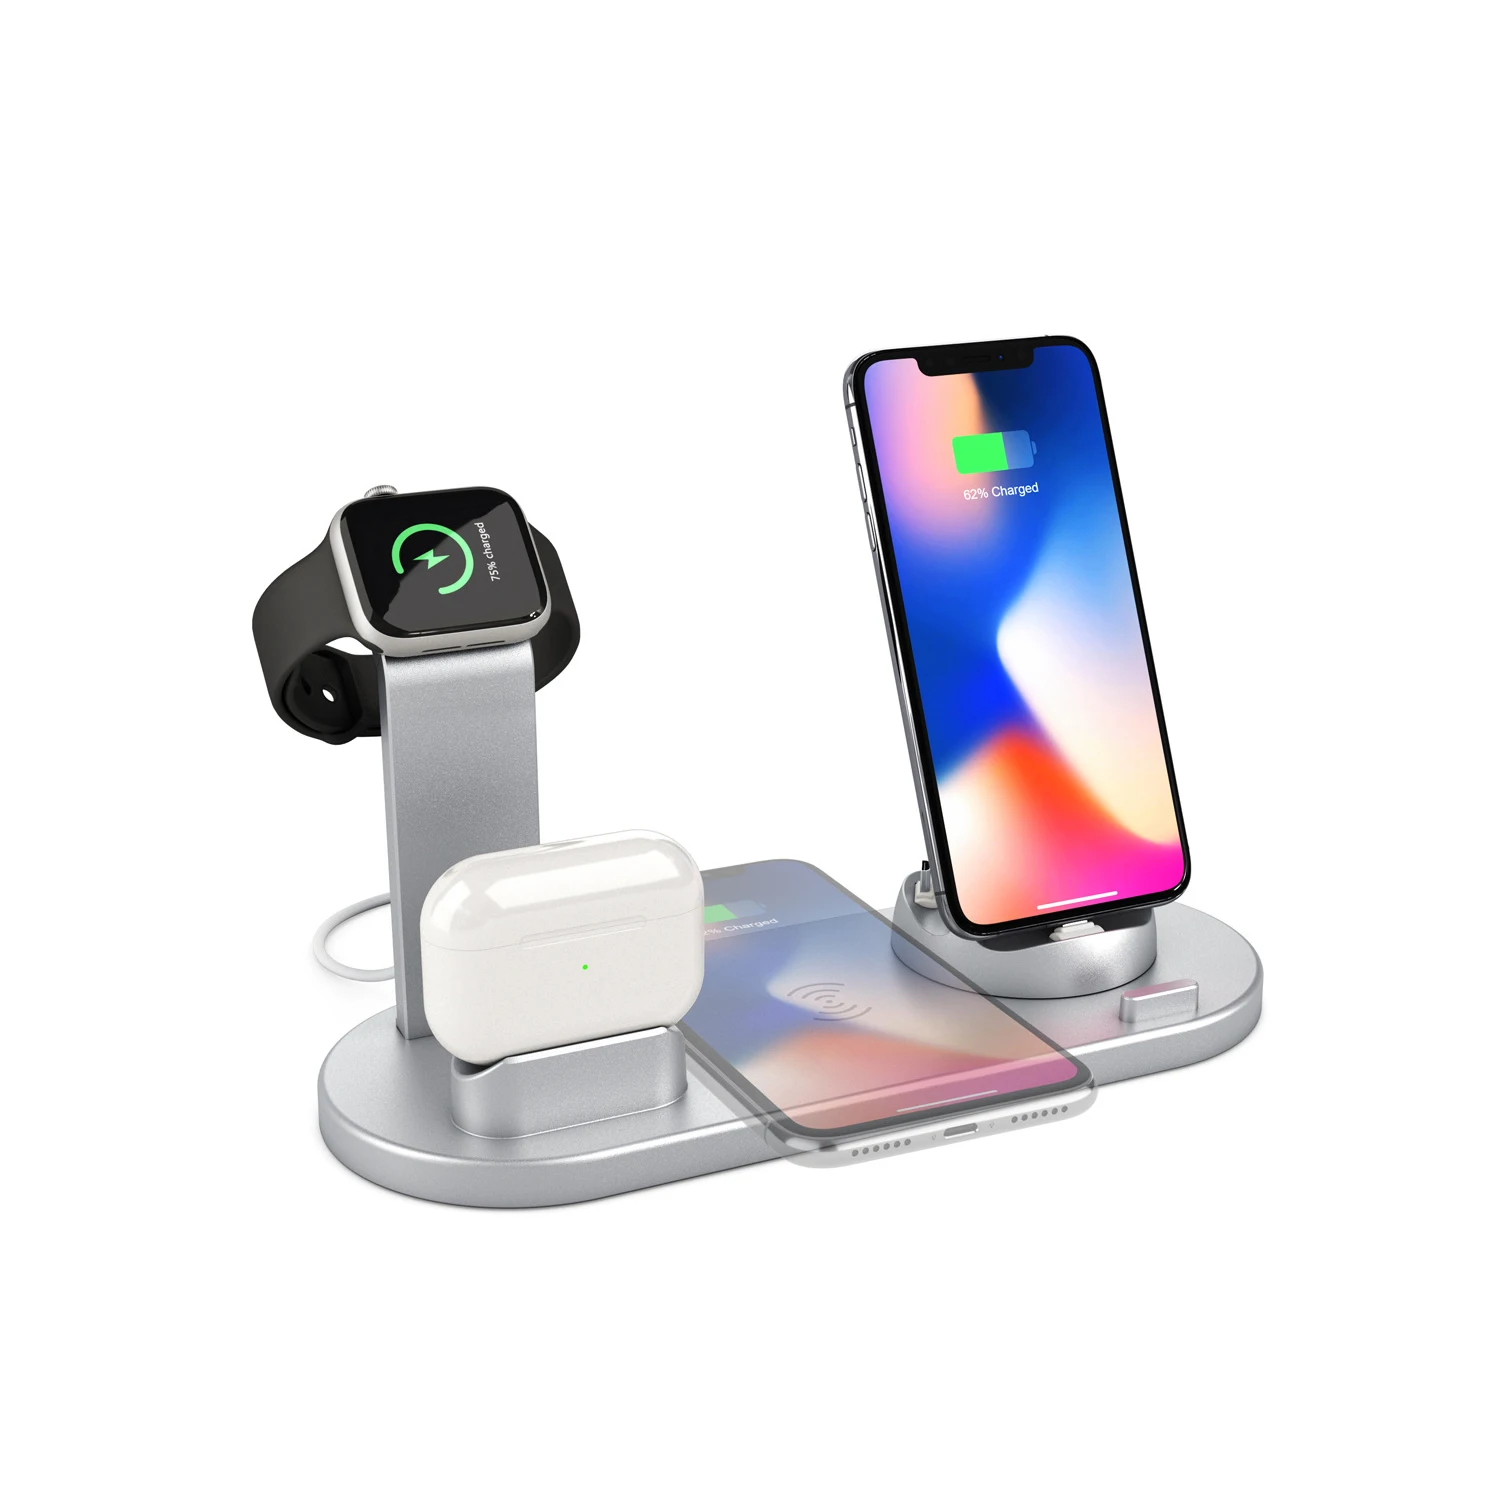 

Amazon Top Selling 4 in 1 Wireless Charger Stand, Qi 10W Fast Wireless Charging Dock, White,black,pink